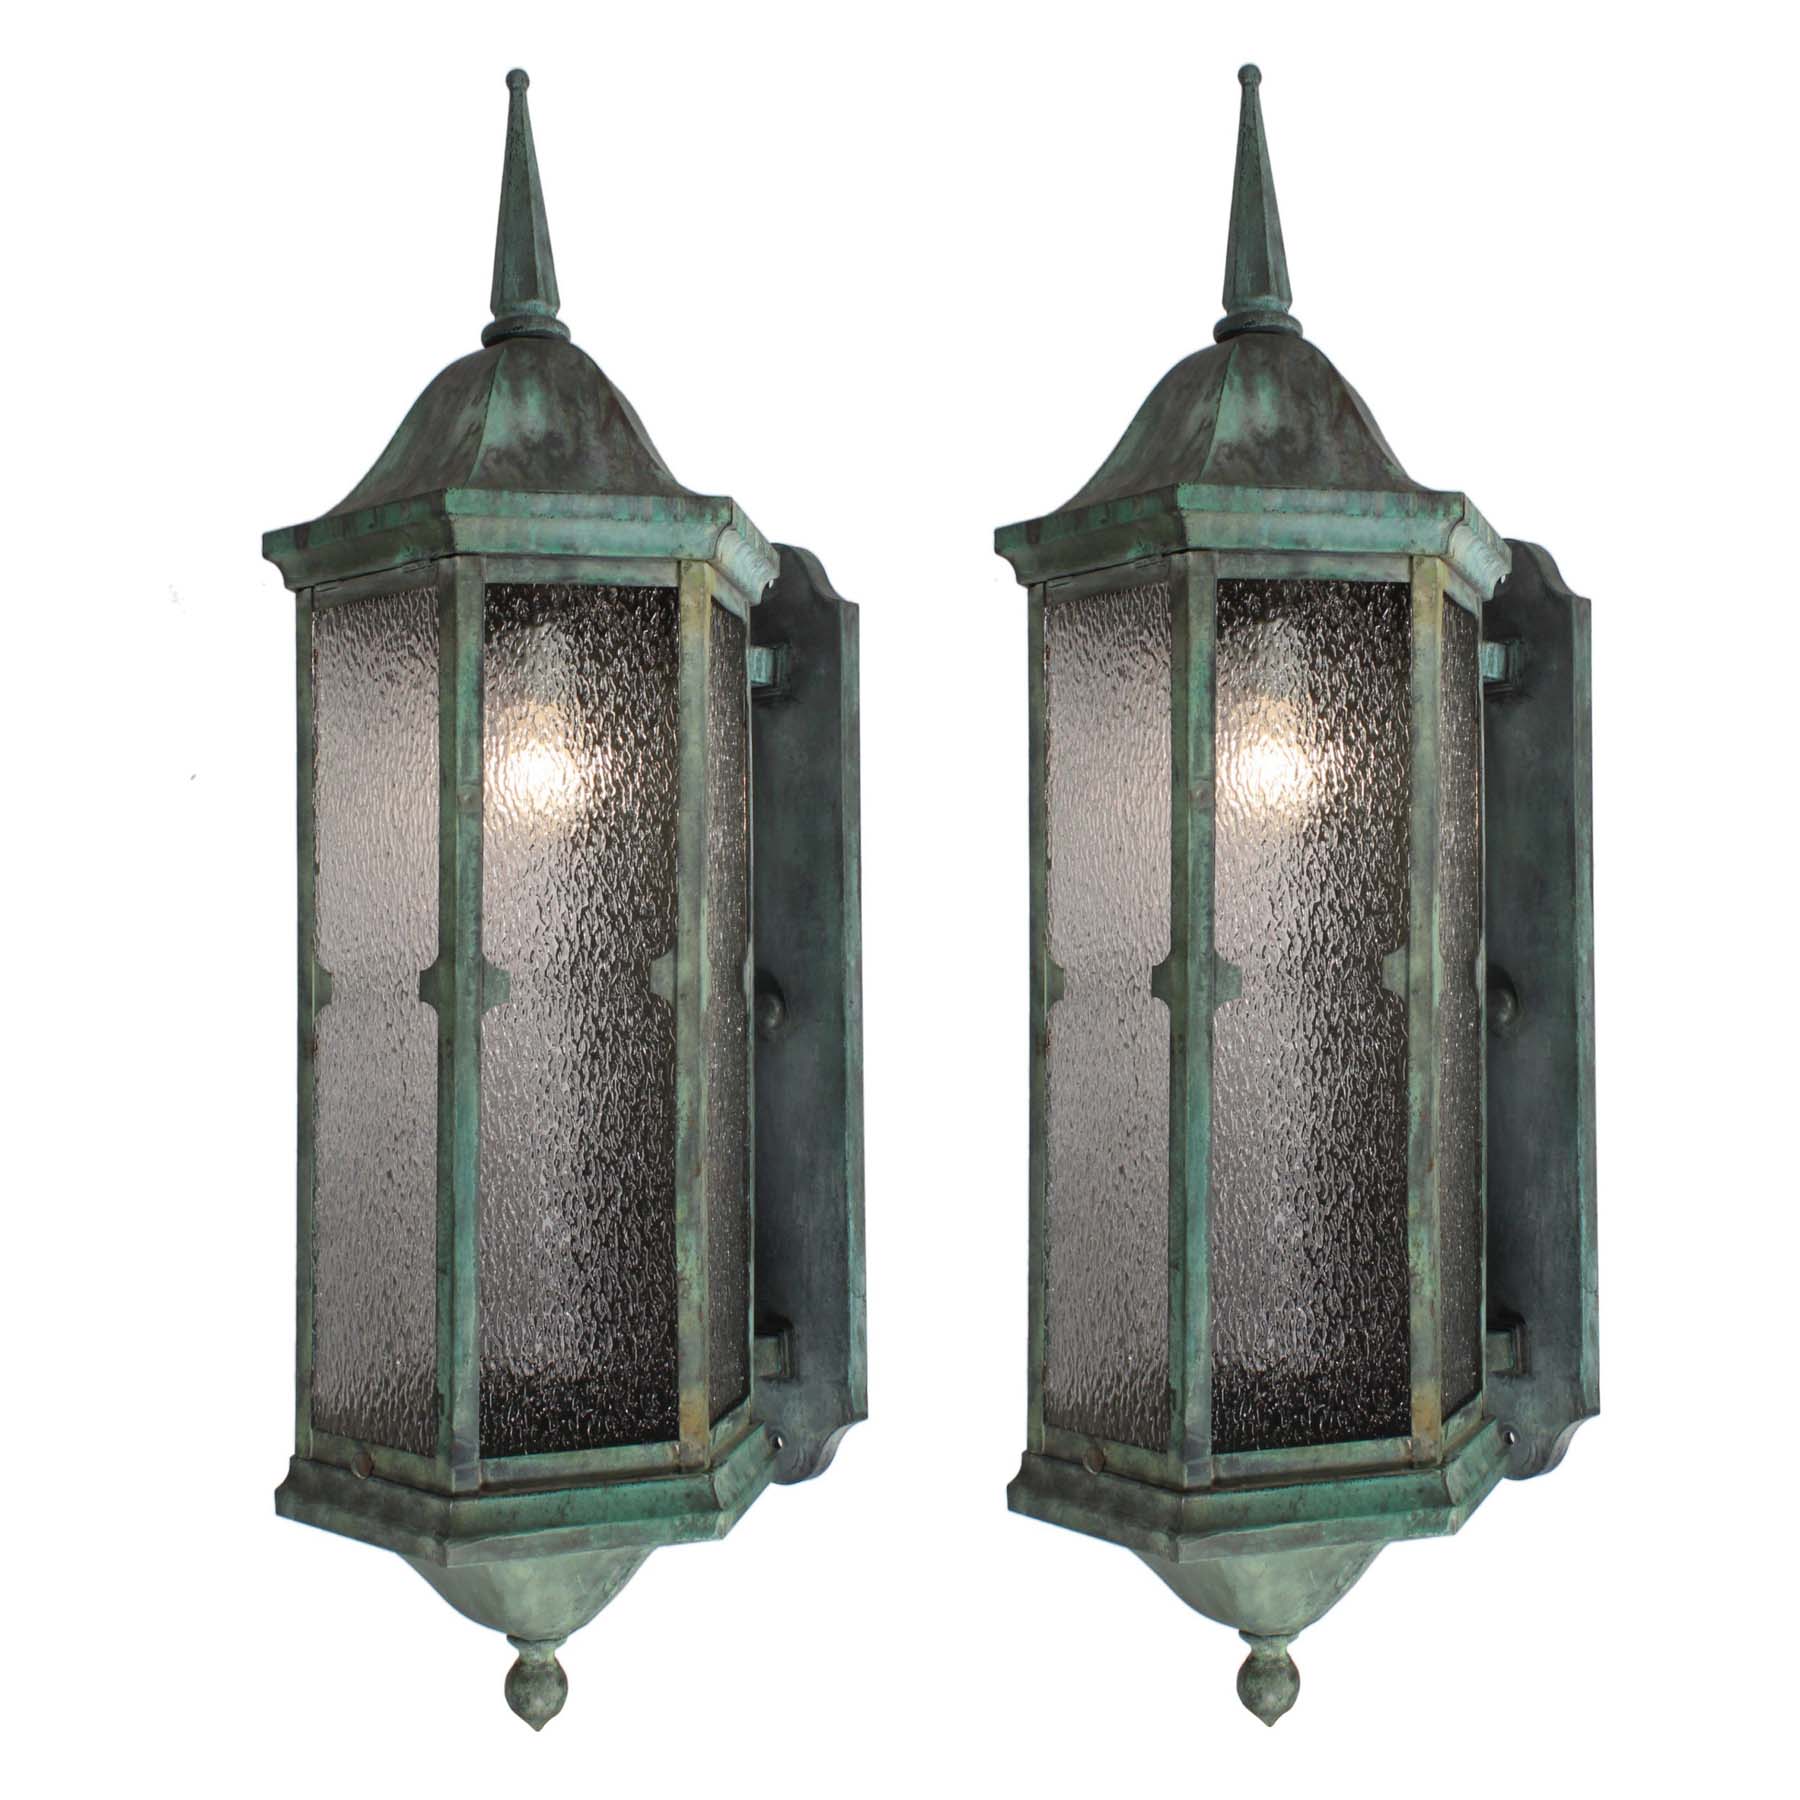 SOLD Pair of Antique Gothic Revival Copper Lantern Sconces, Early 1900s-0